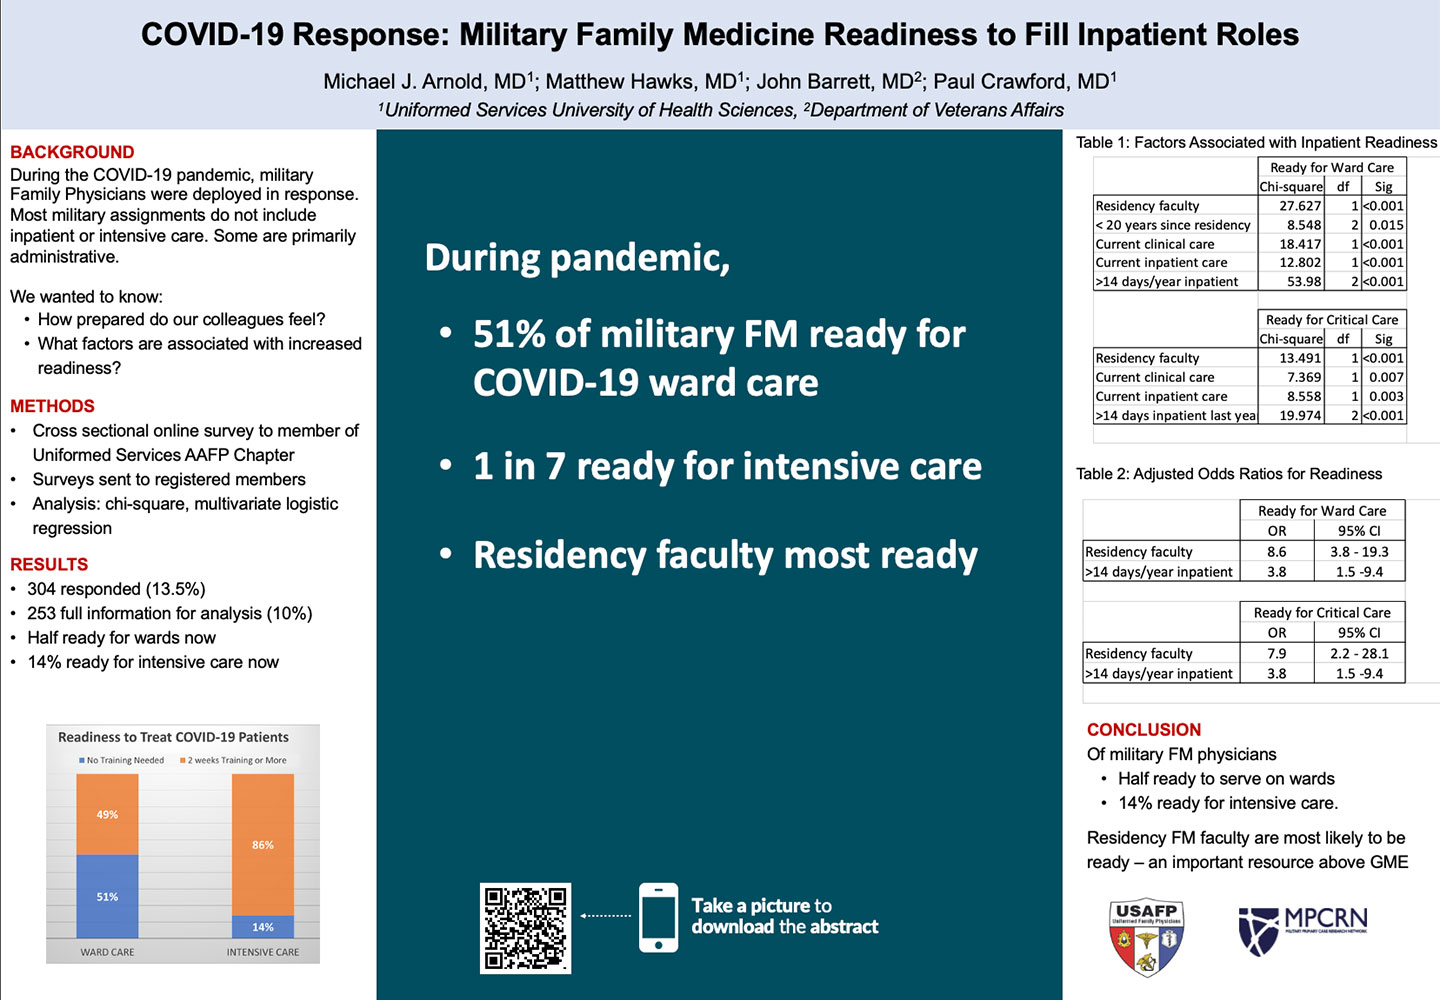 Sample Poster 2.0 - COVID Readiness